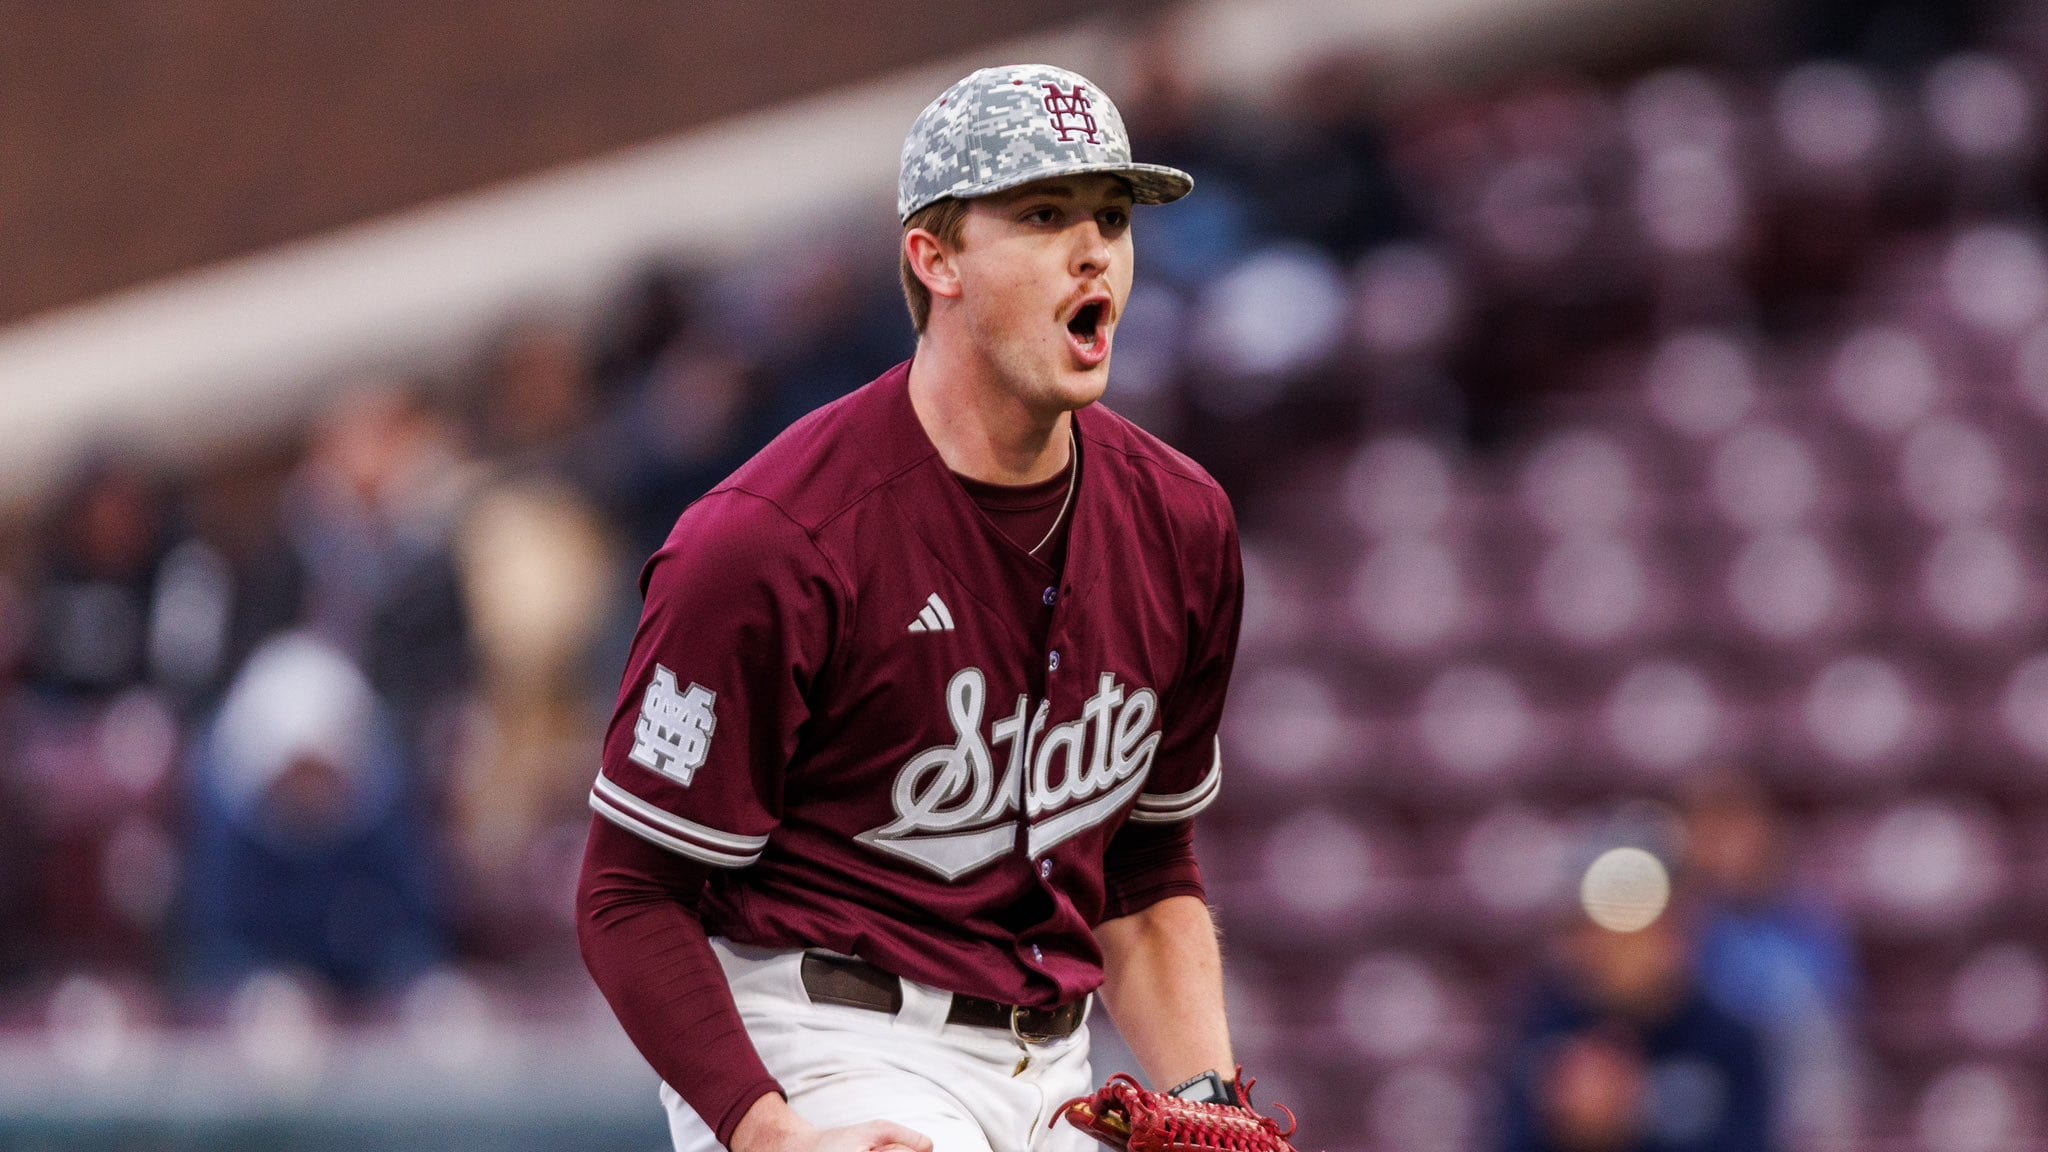 A Pair of Good Performances Lead Mississippi State to a 7-4 Win Over Vanderbilt